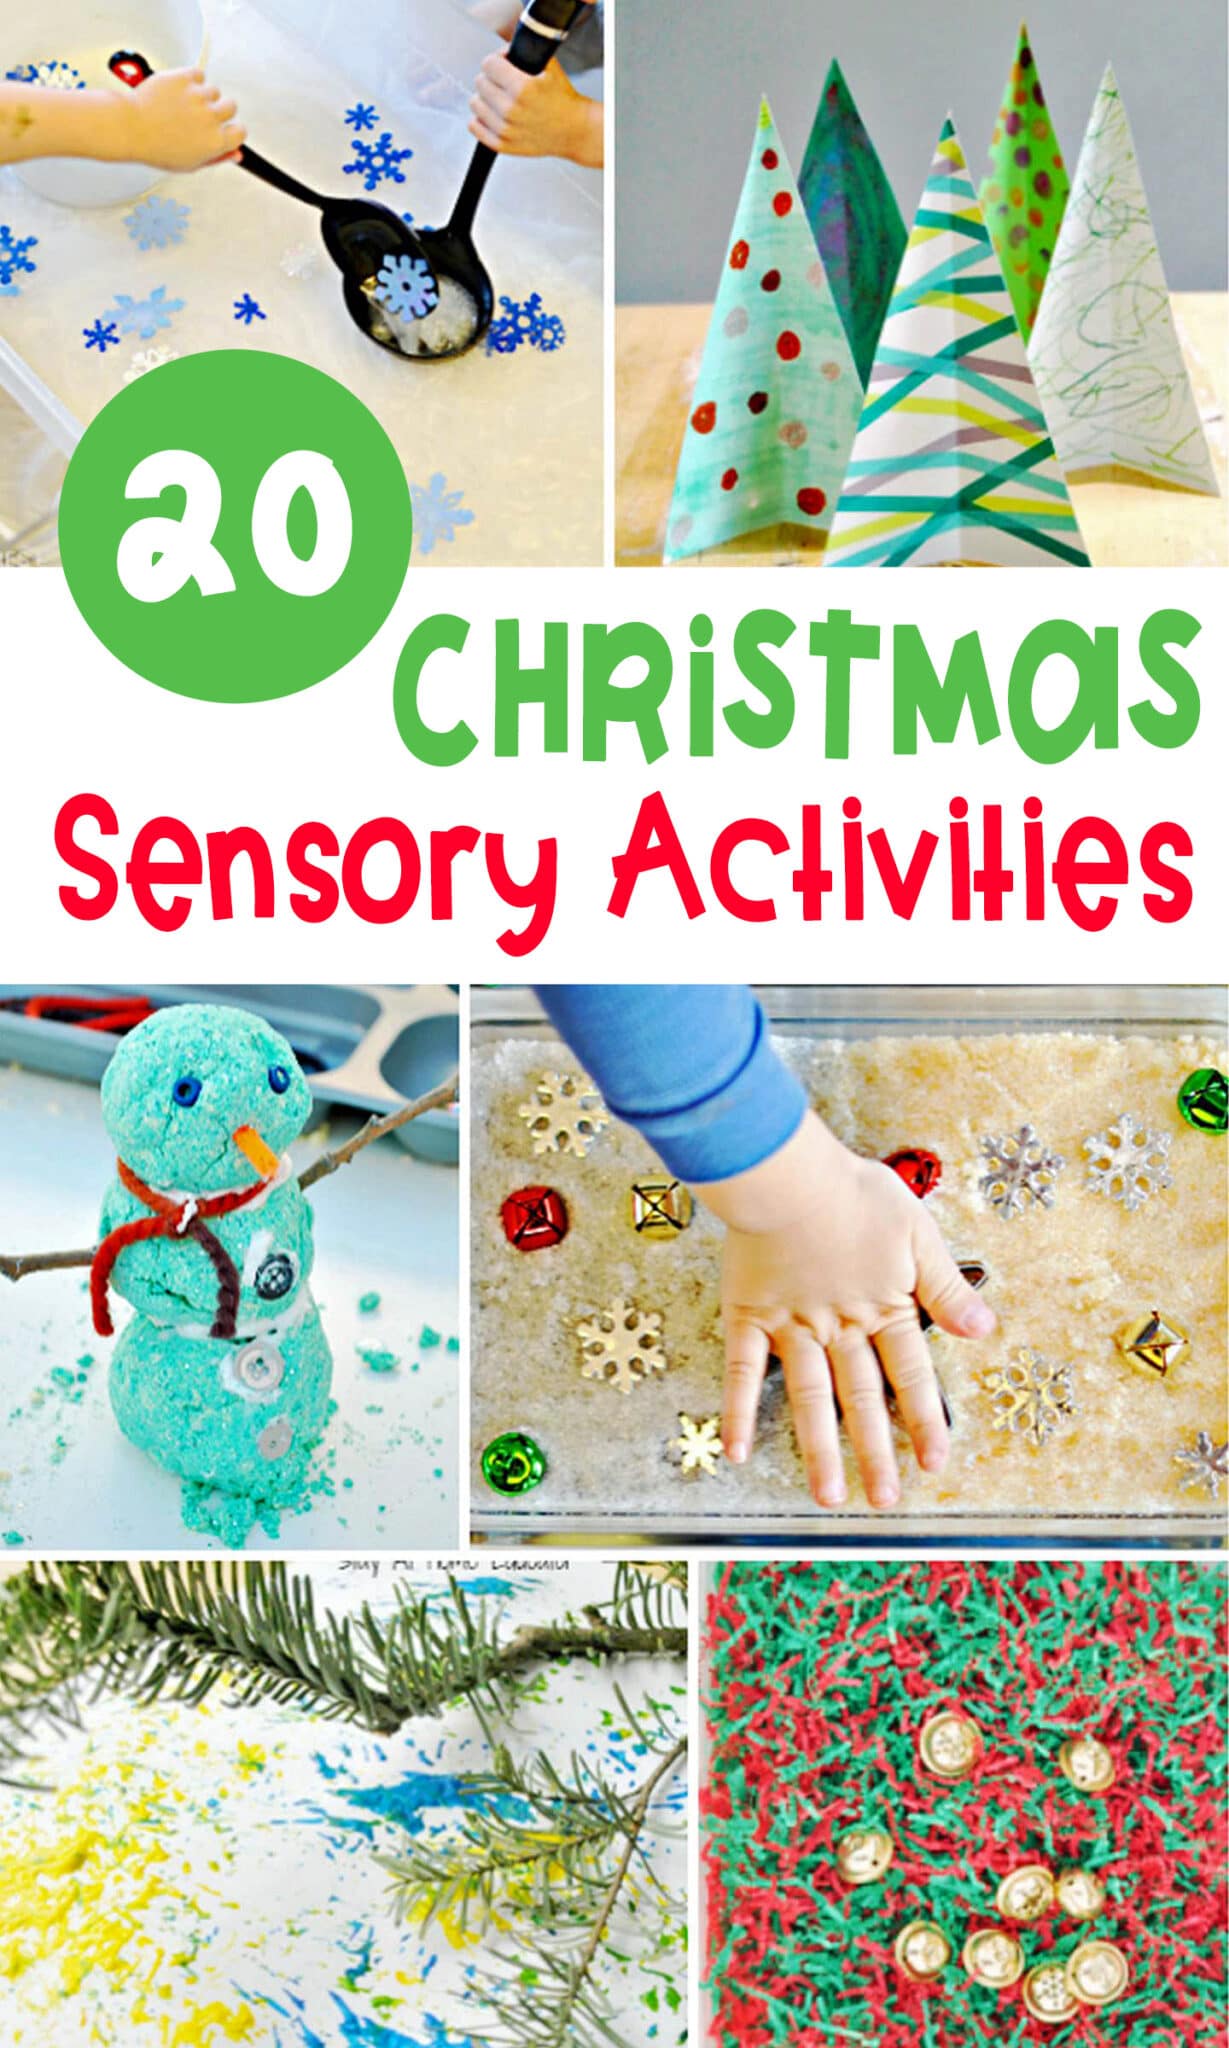 Looking for some festive activities? These 20 sensational Christmas sensory activities for kids are a great addition to the holiday season!